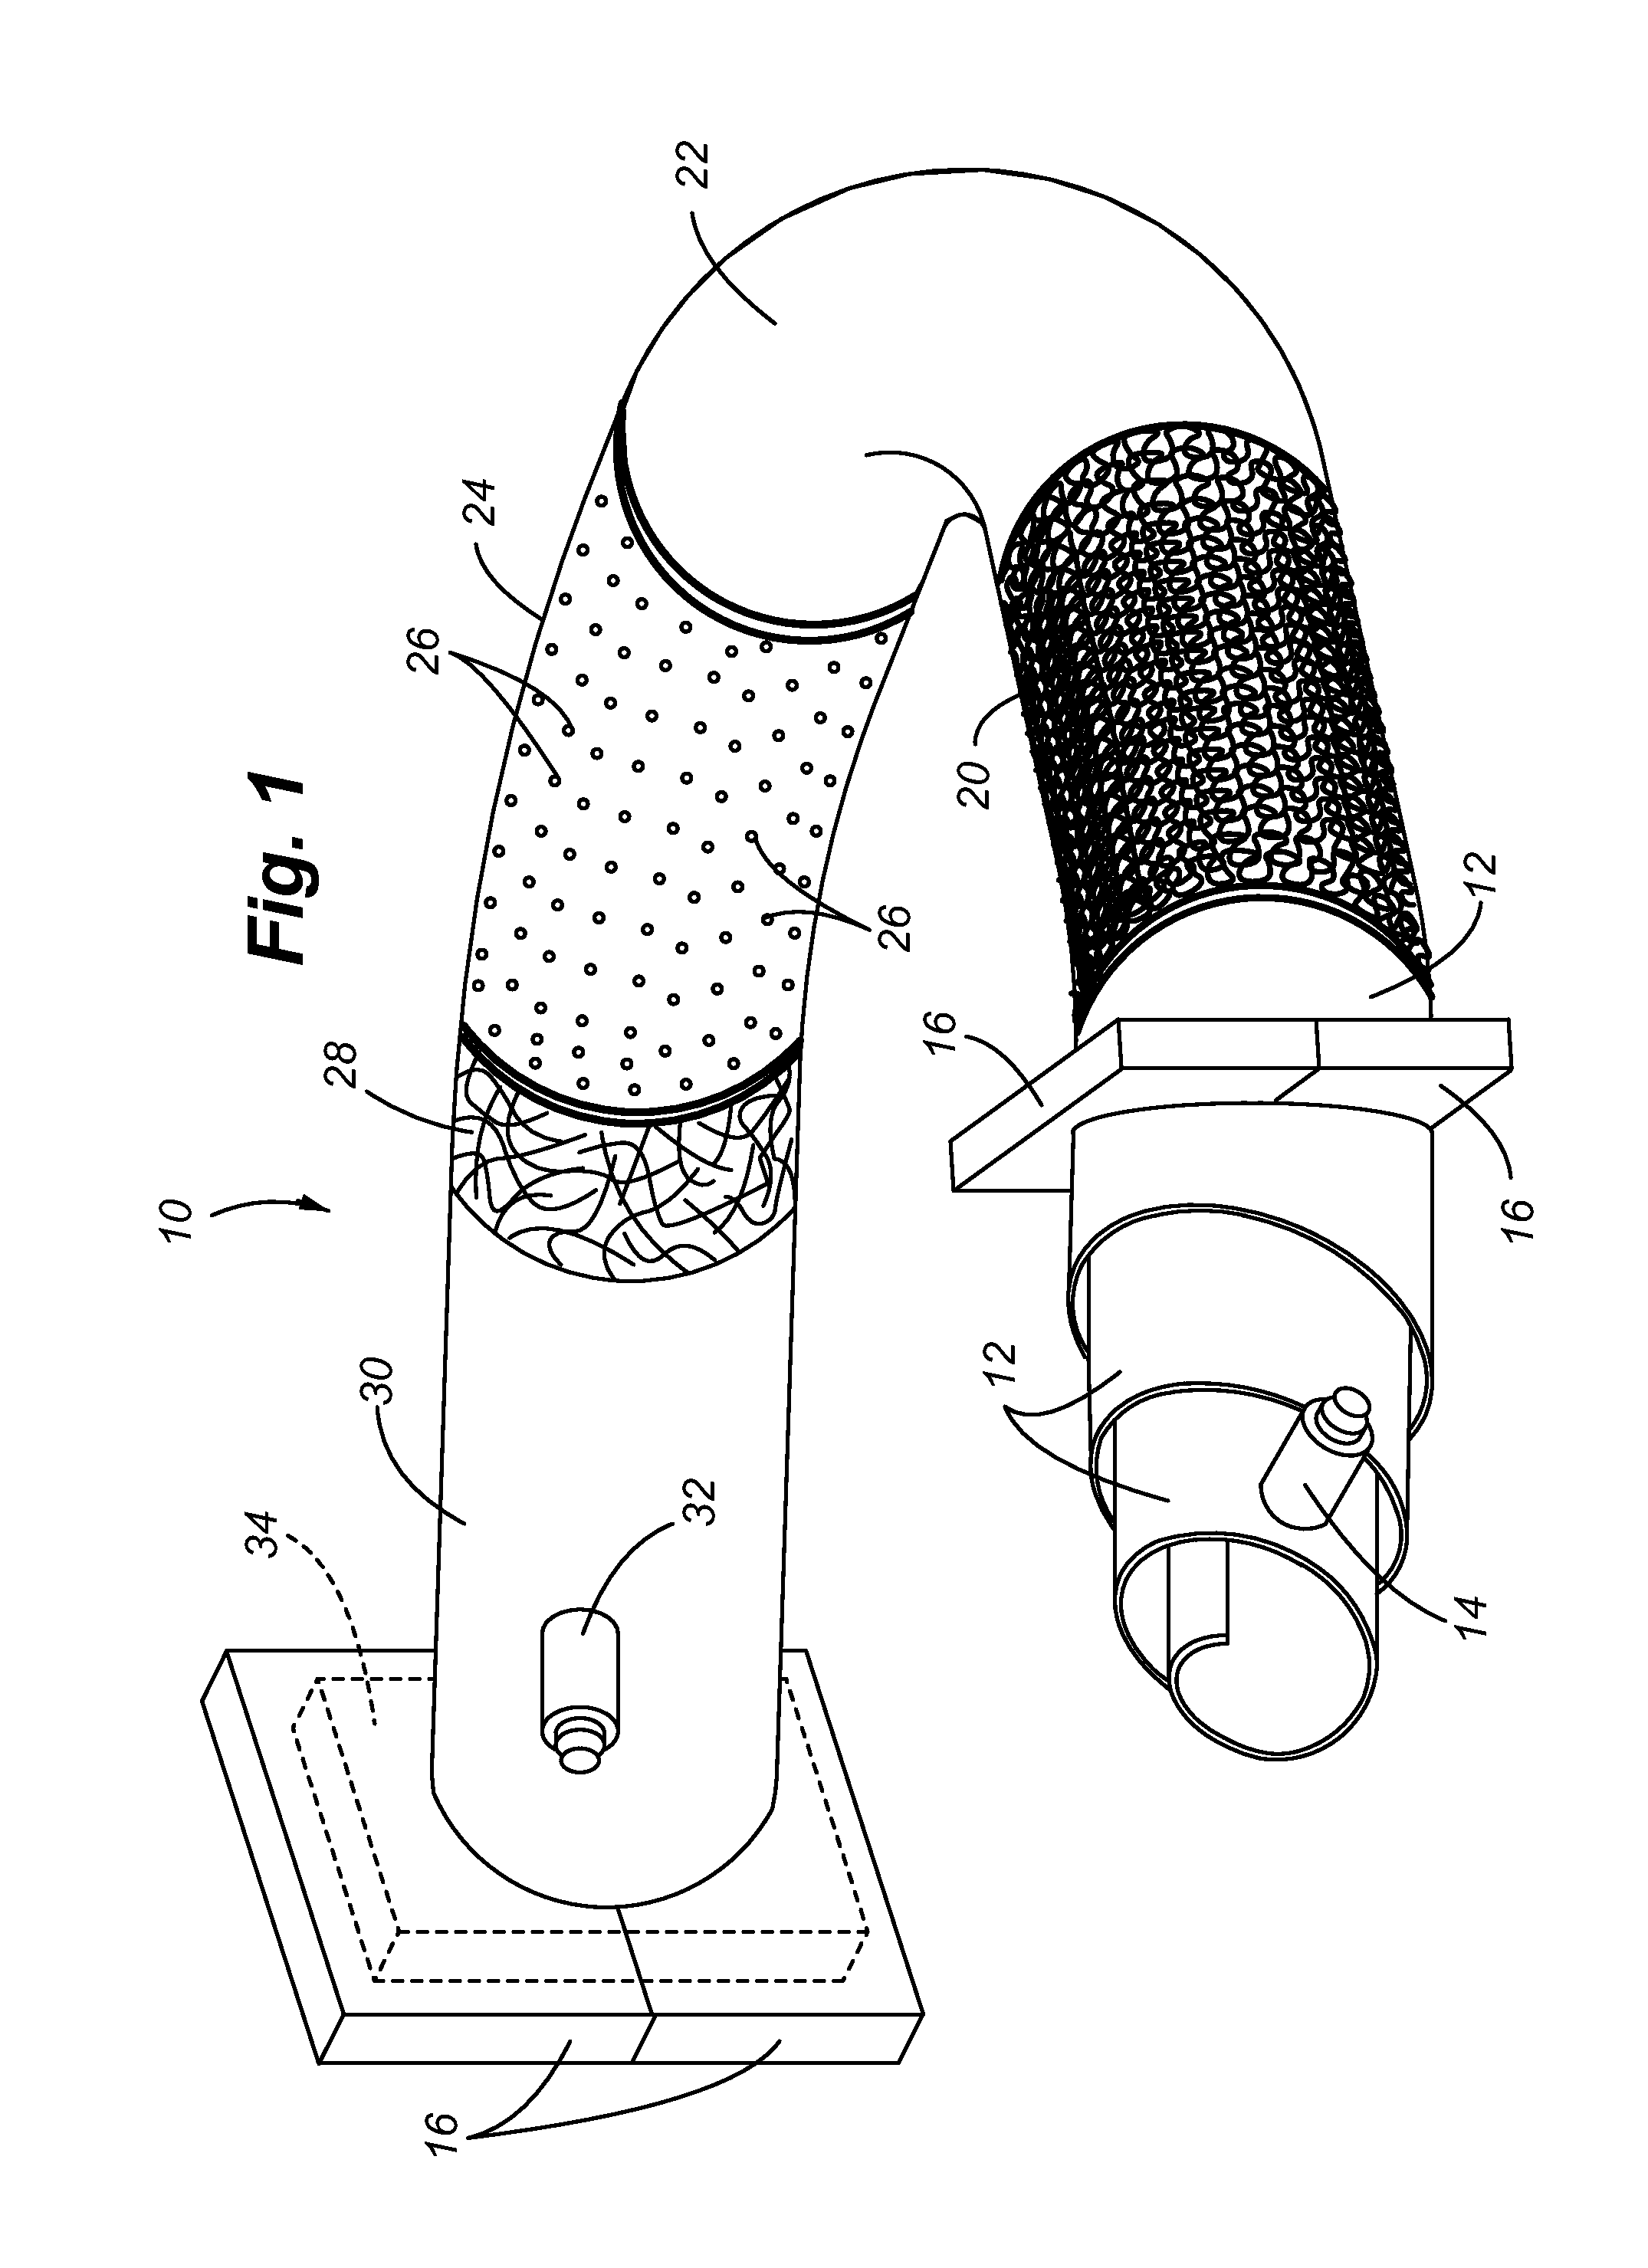 Conductive mesh for composite tube for fluid delivery system